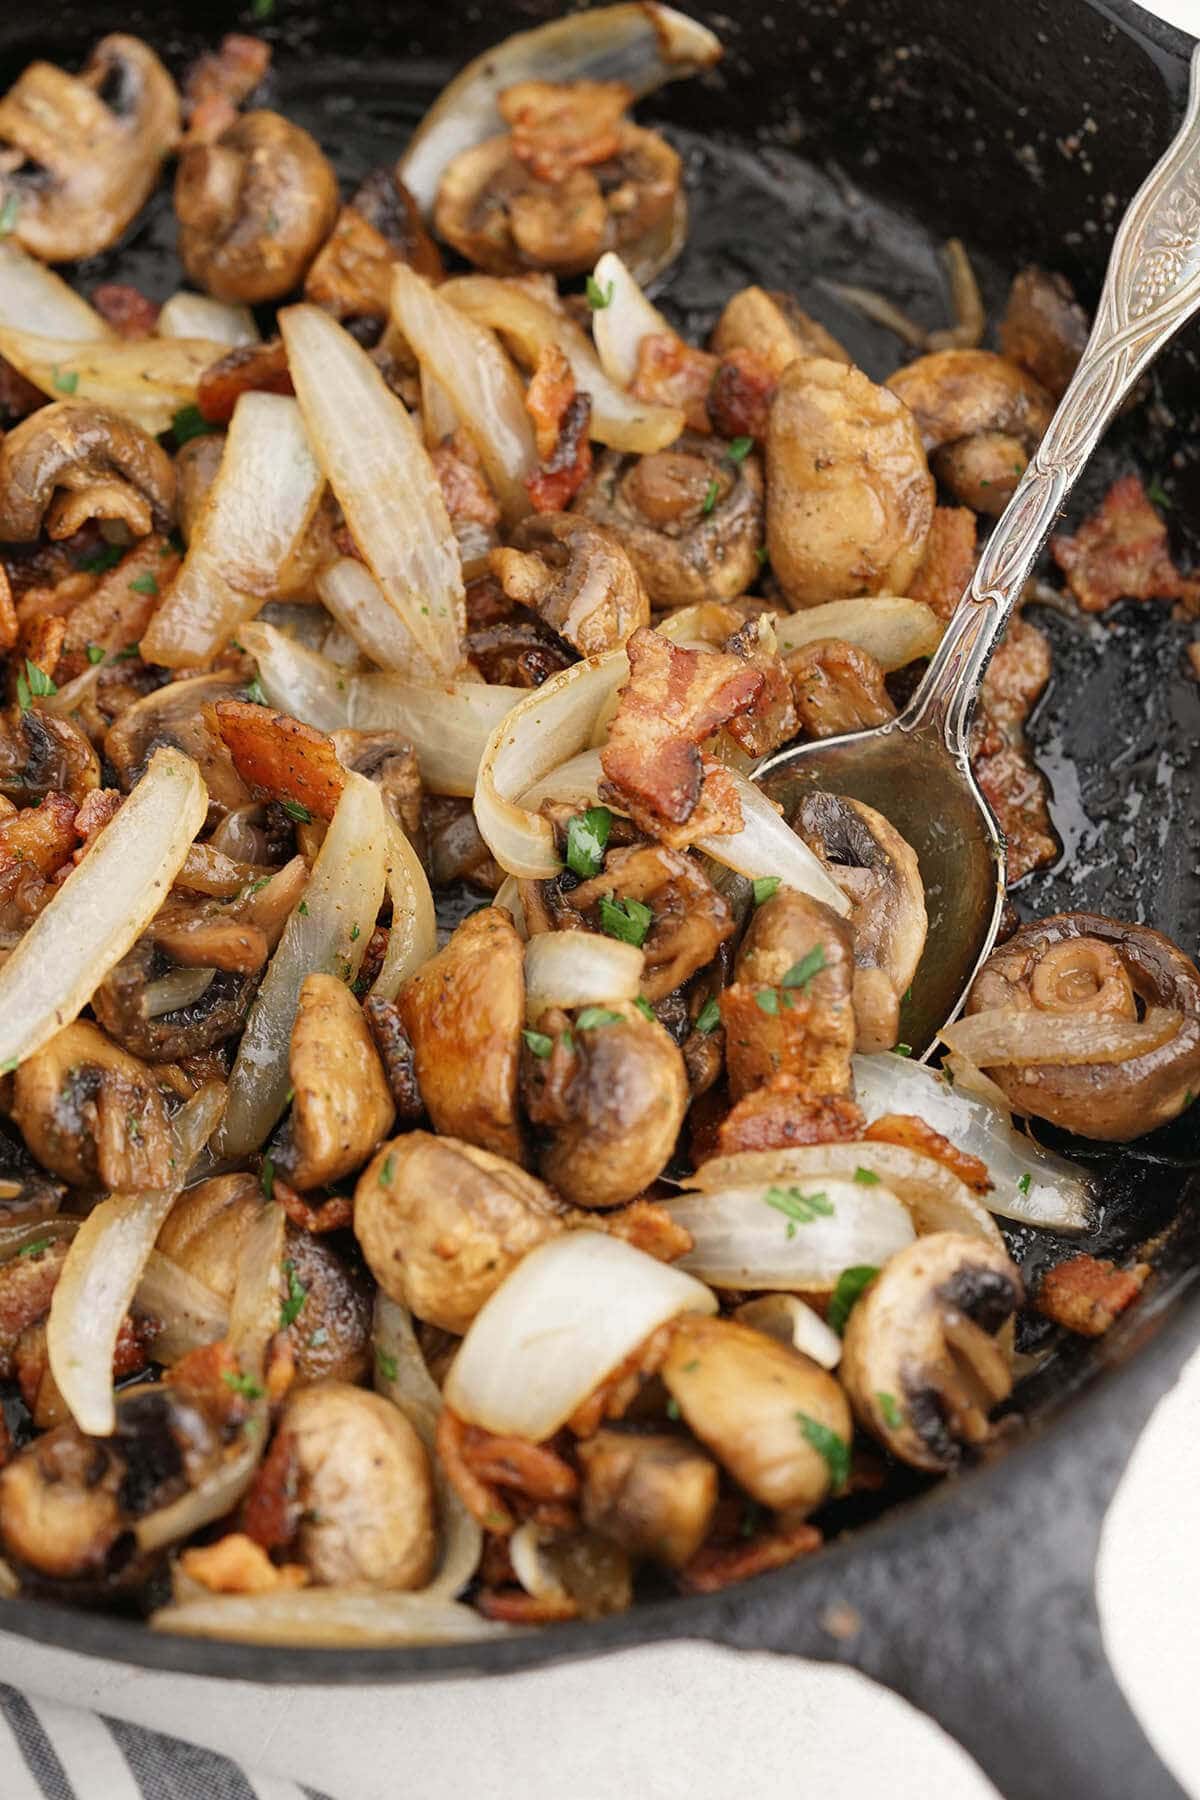 Pan roasted mushrooms and onions in cast iron skillet.